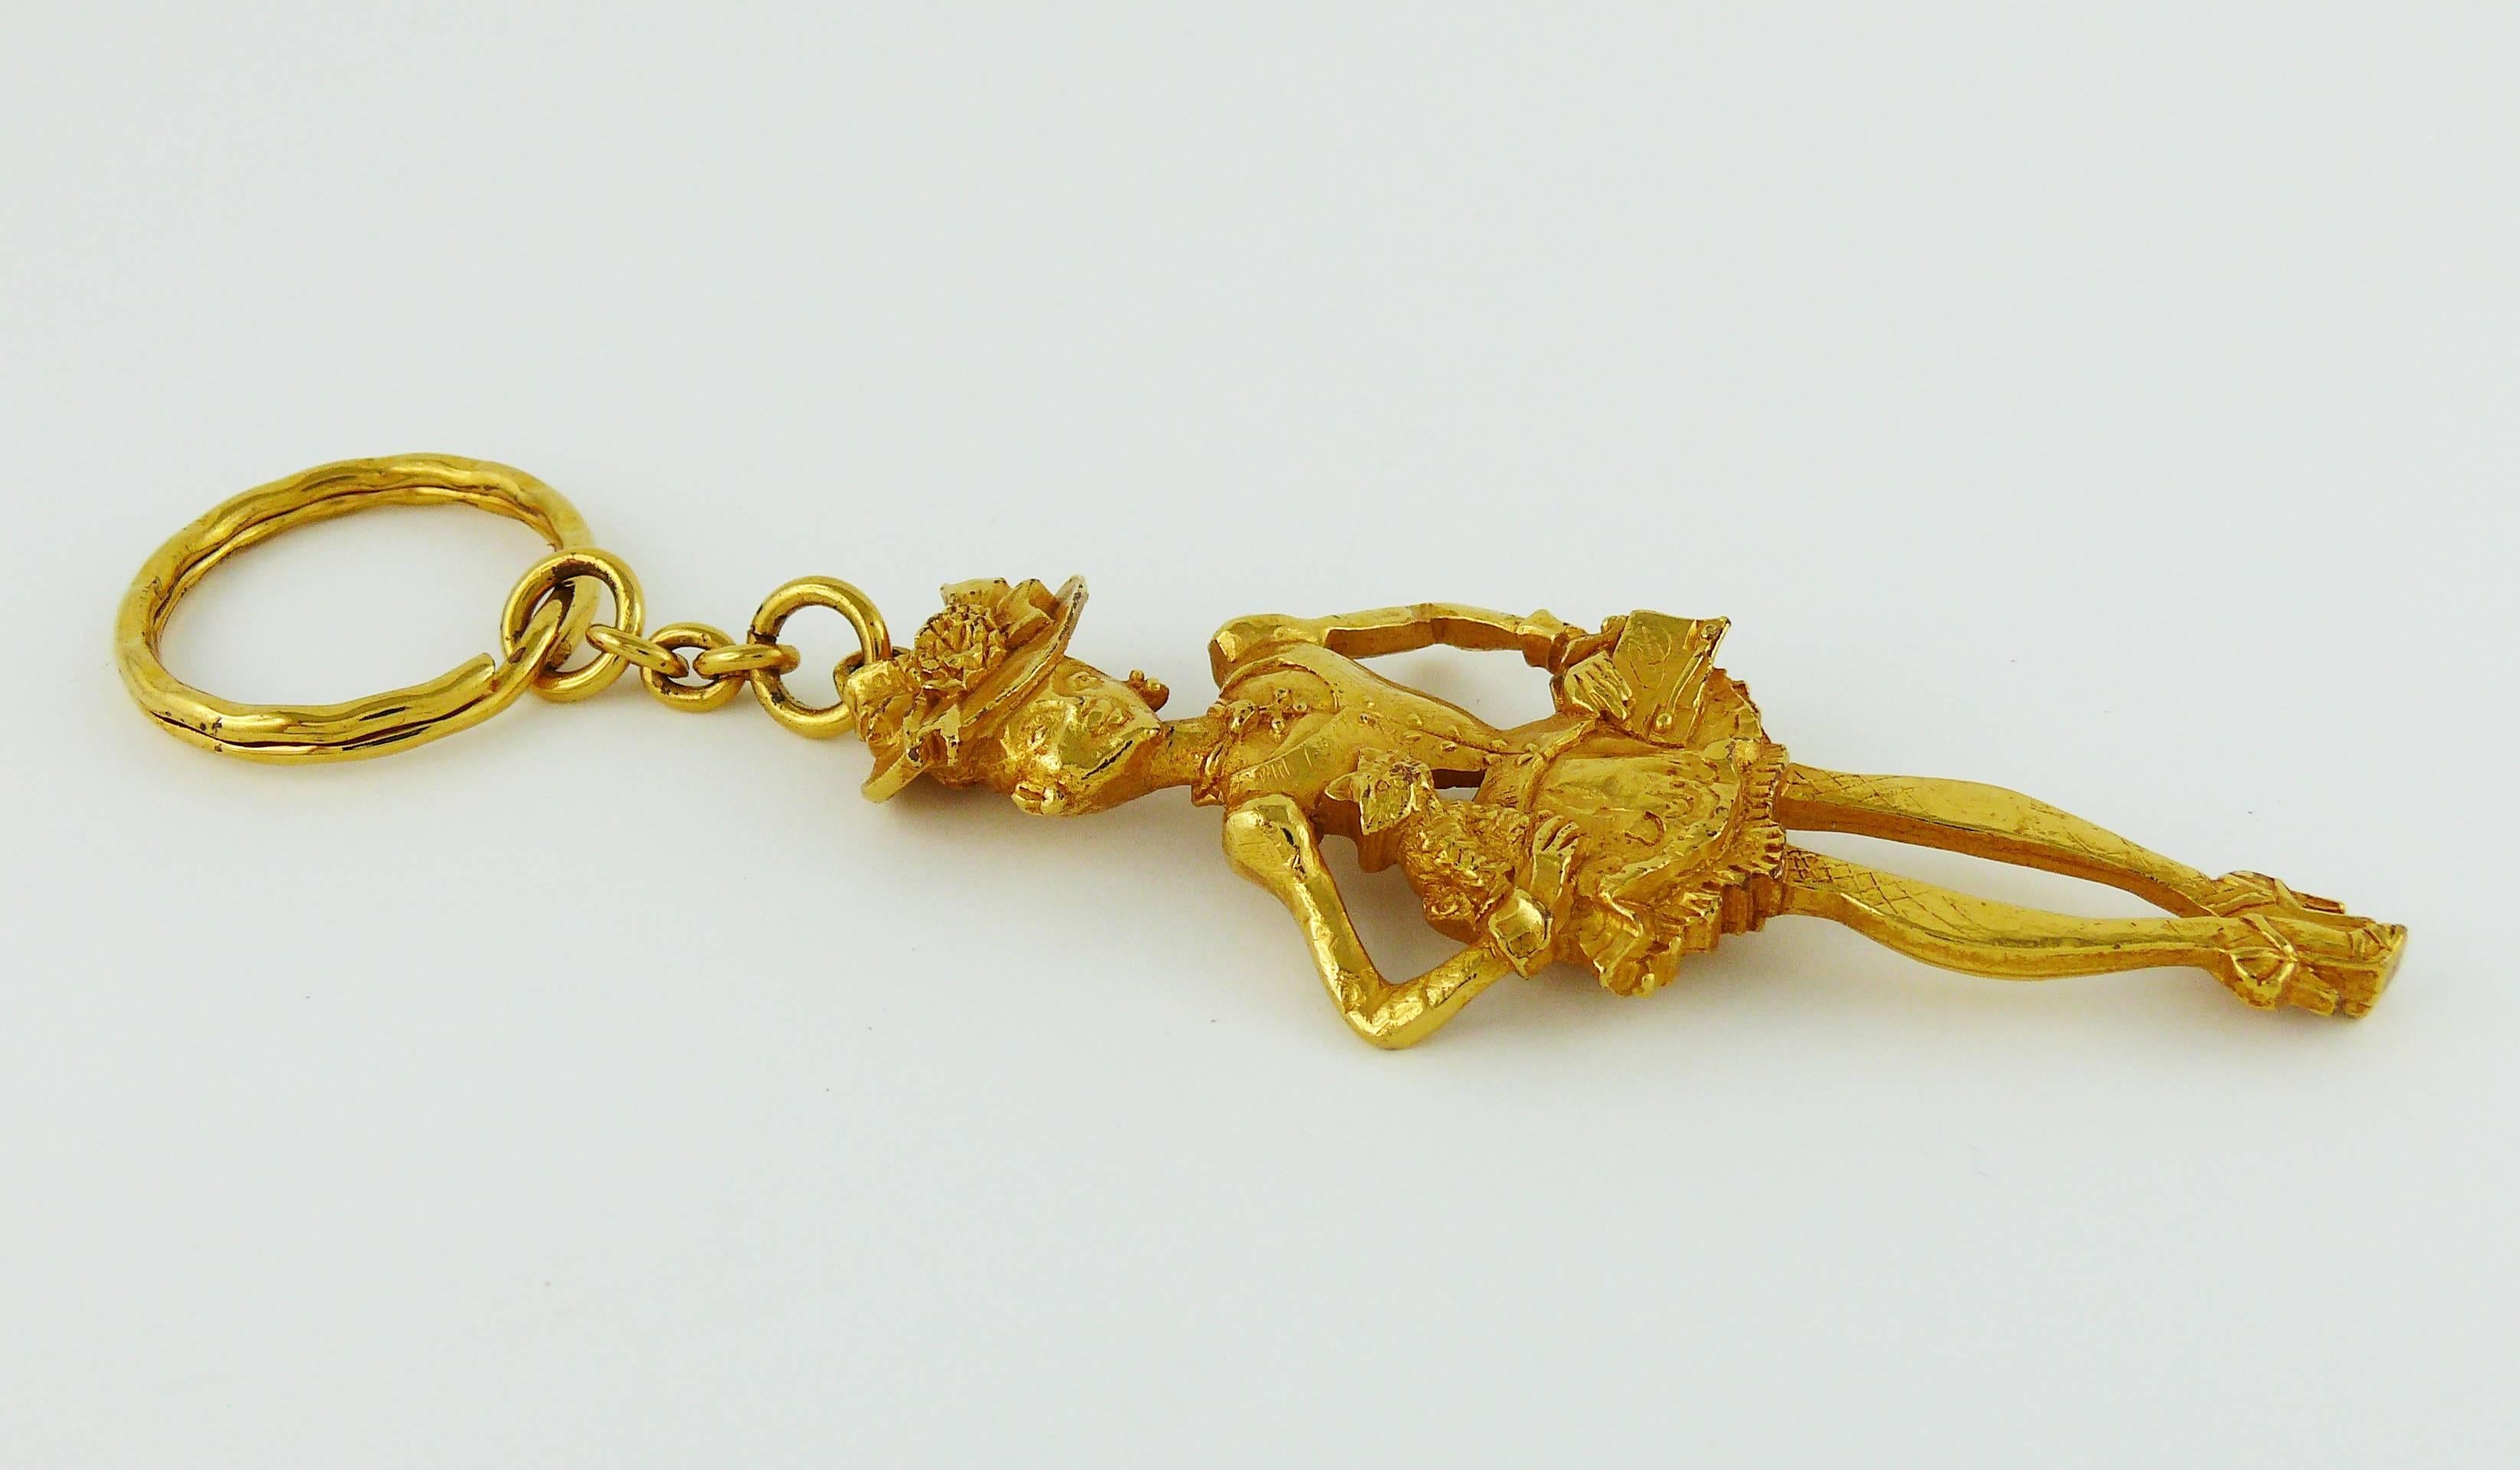 CHRISTIAN LACROIX gorgeous vintage figural gold tone key ring / bag charm.

Embossed CL Made in France.

Indicative measurements : total length approx. 13.5 cm (5.31 inches) / lady approx. 8.4 cm x 3.5 cm (3.31 inches x 1.38 inches).

JEWELRY